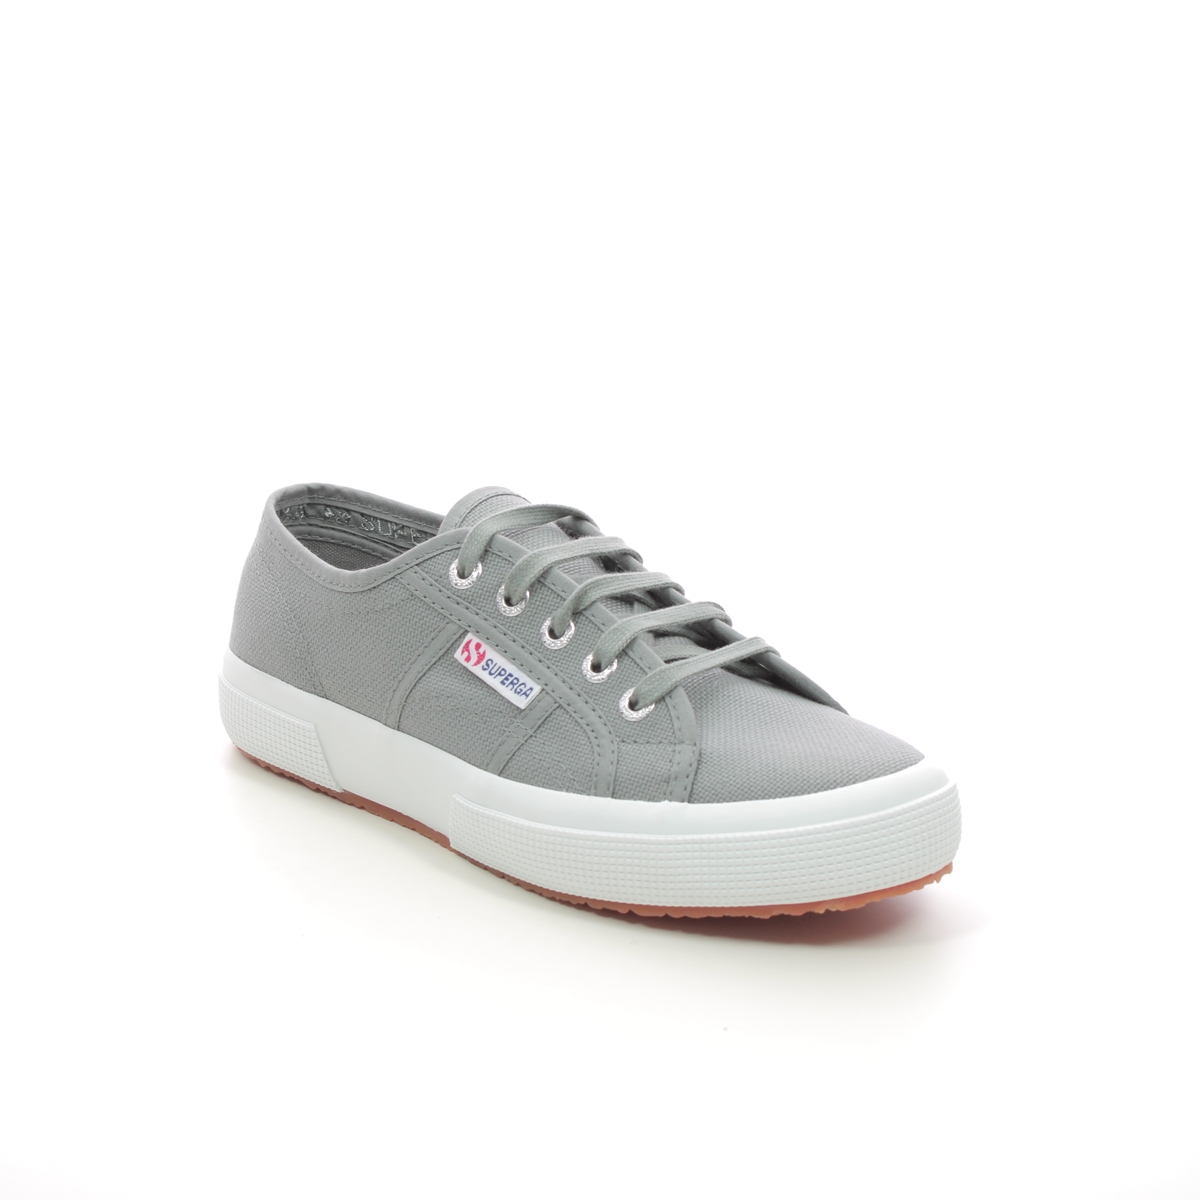 Superga Cotu Sage Womens trainers S000010-M38 in a Plain Canvas in Size 41